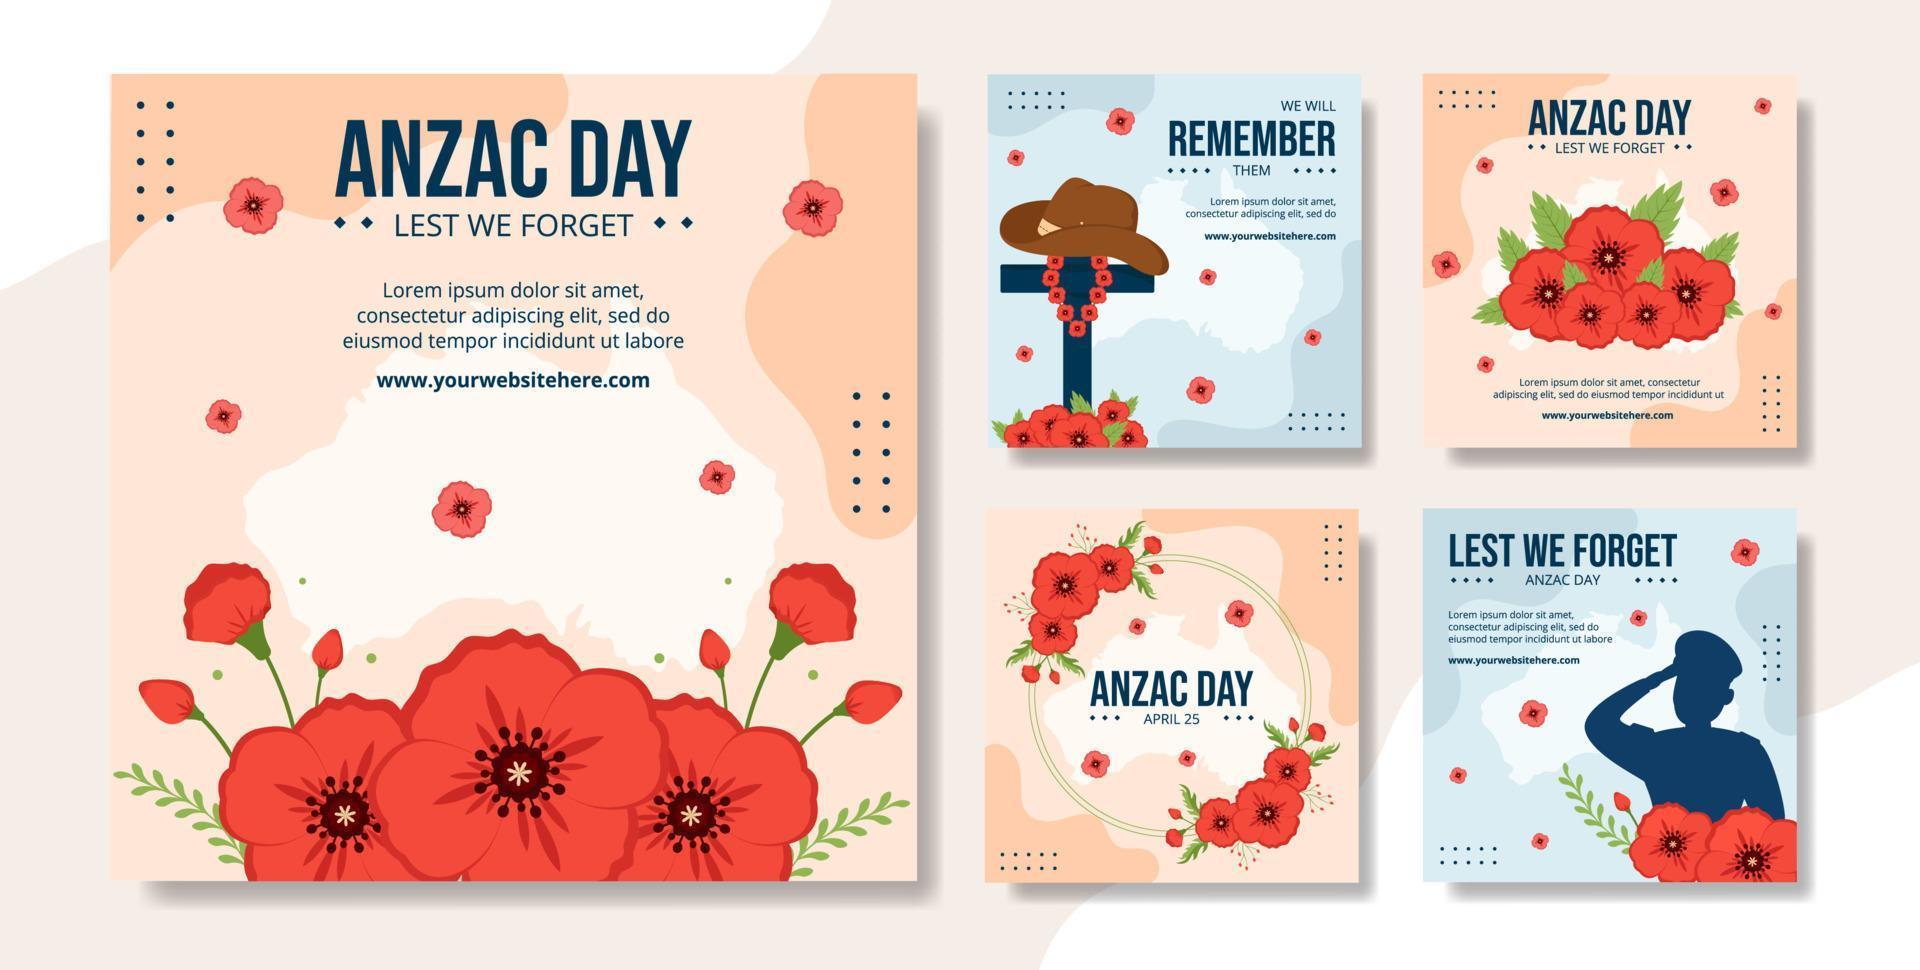 Anzac Day of Lest We Forget Social Media Post Flat Cartoon Hand Drawn Templates Illustration vector